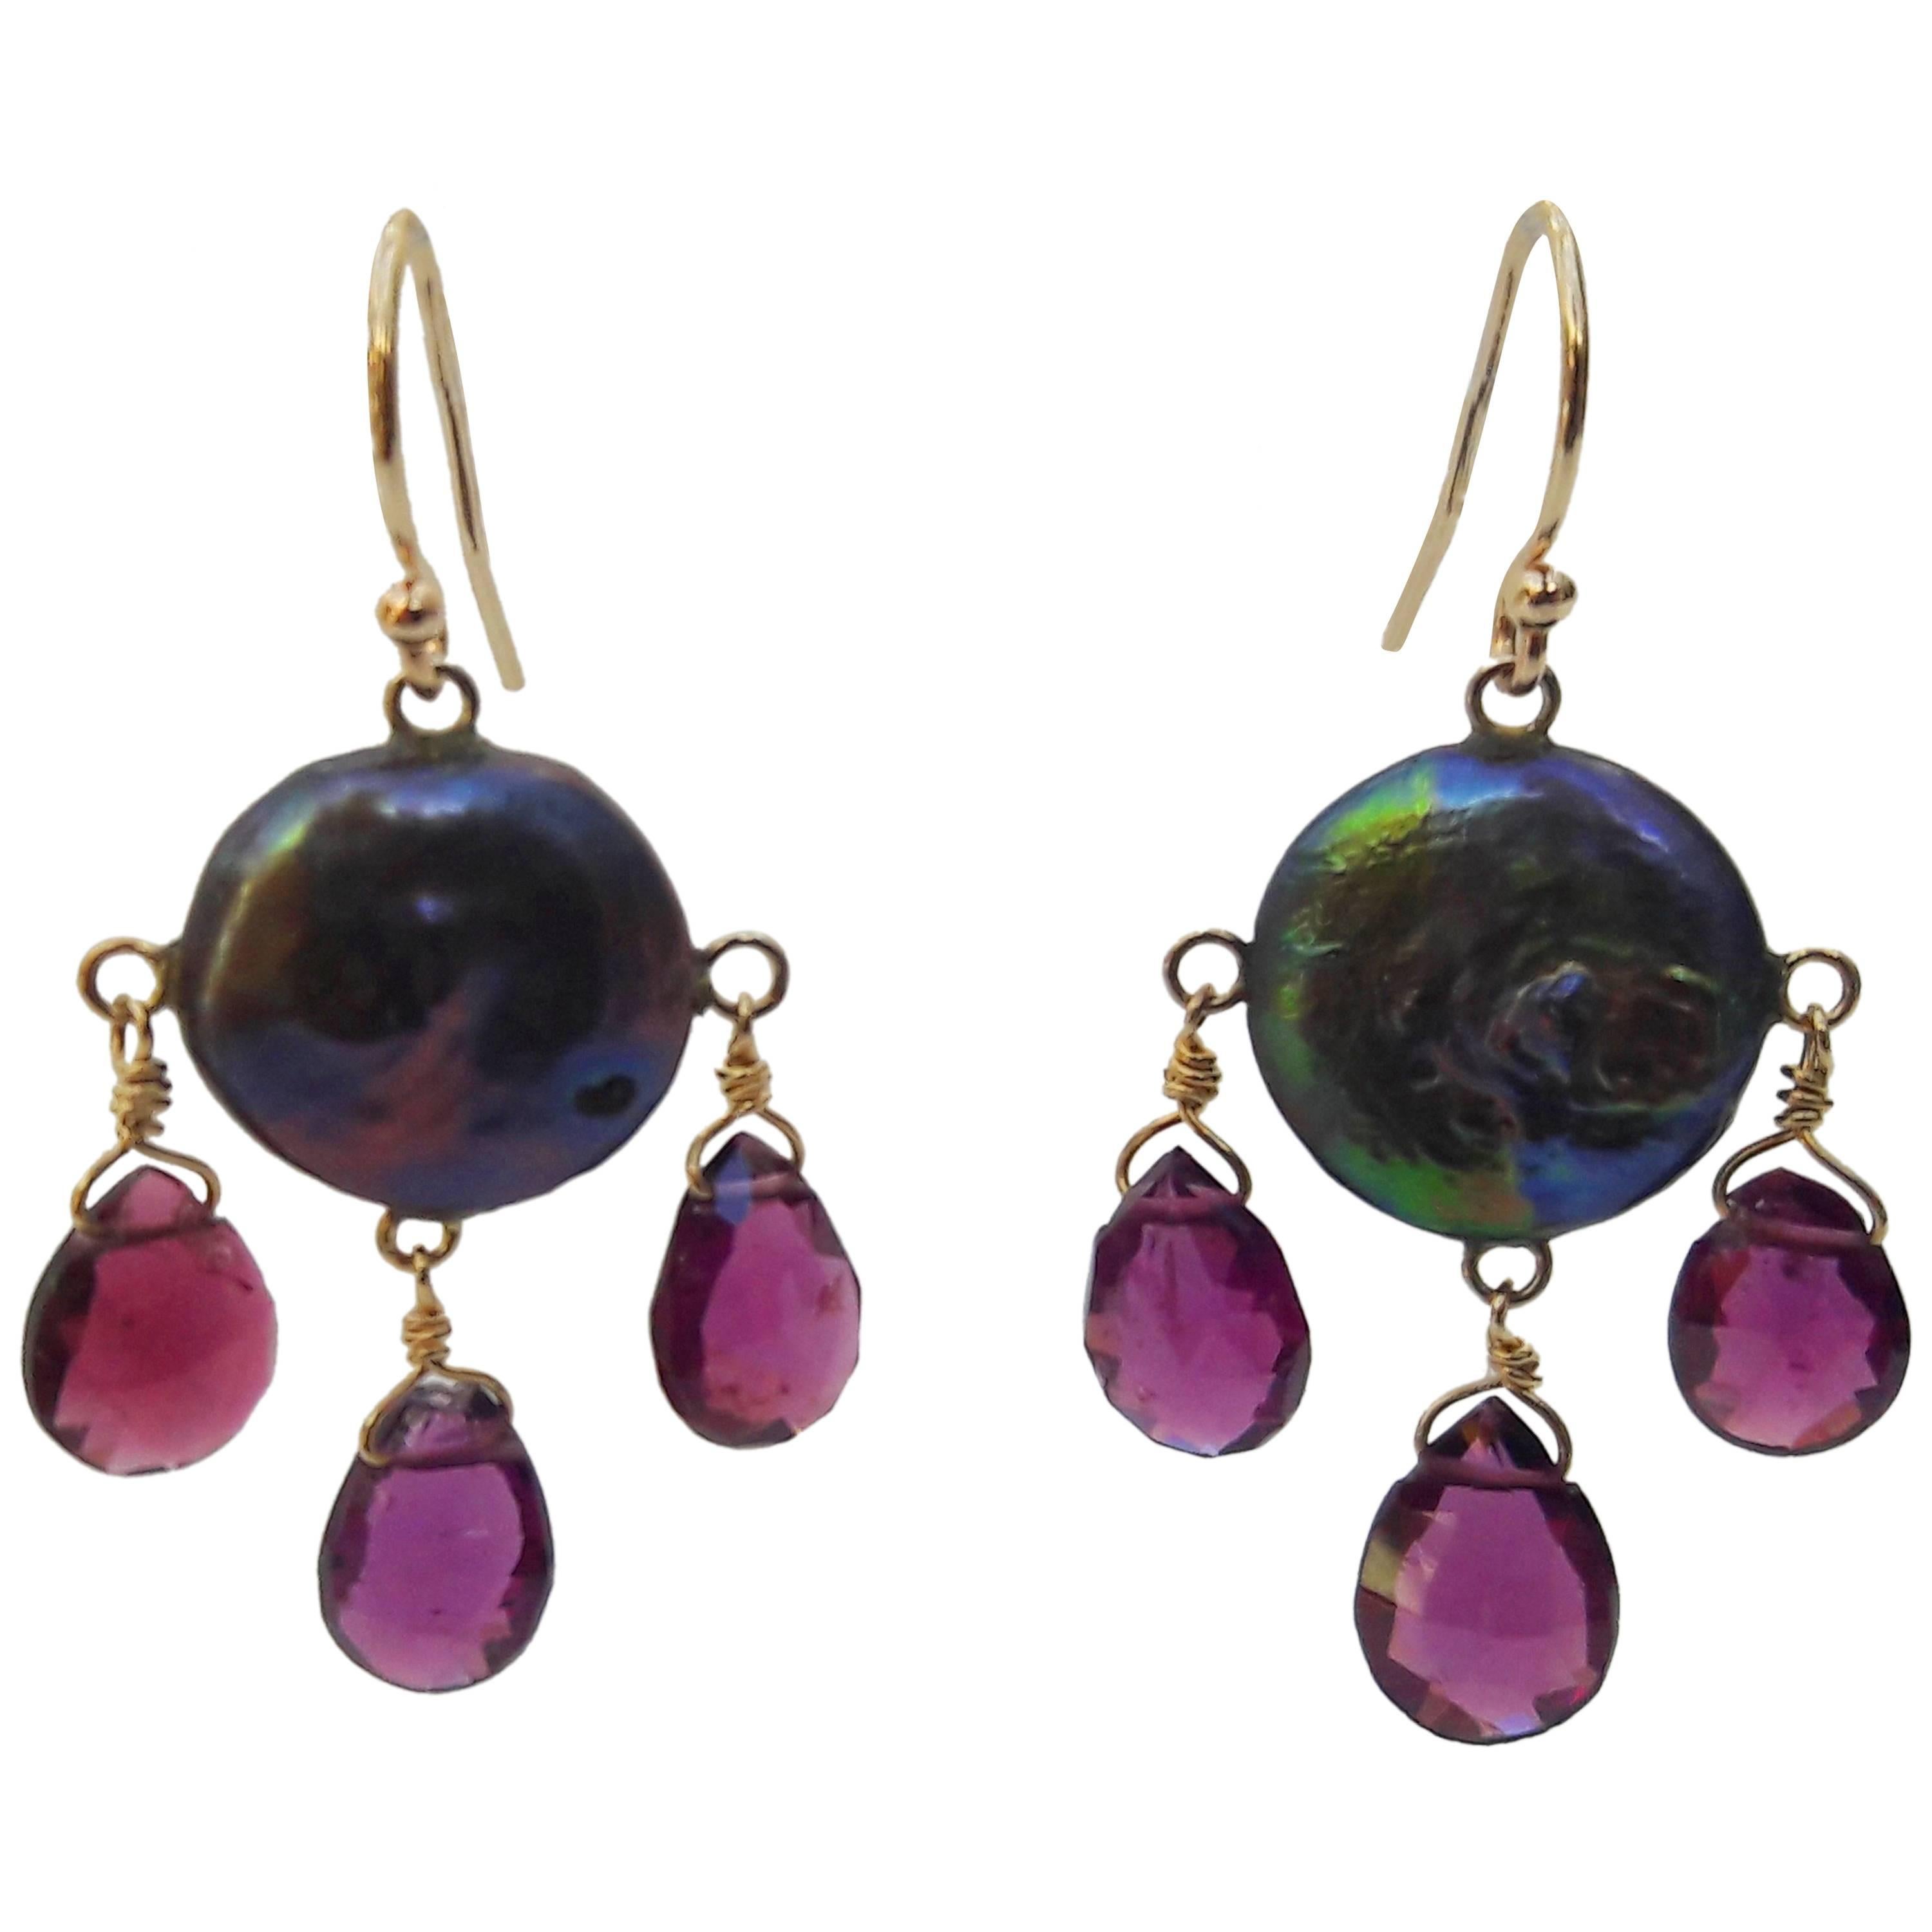 Marina J Black Pearl and Pink Tourmaline Earrings with 14k Yellow Gold Hook